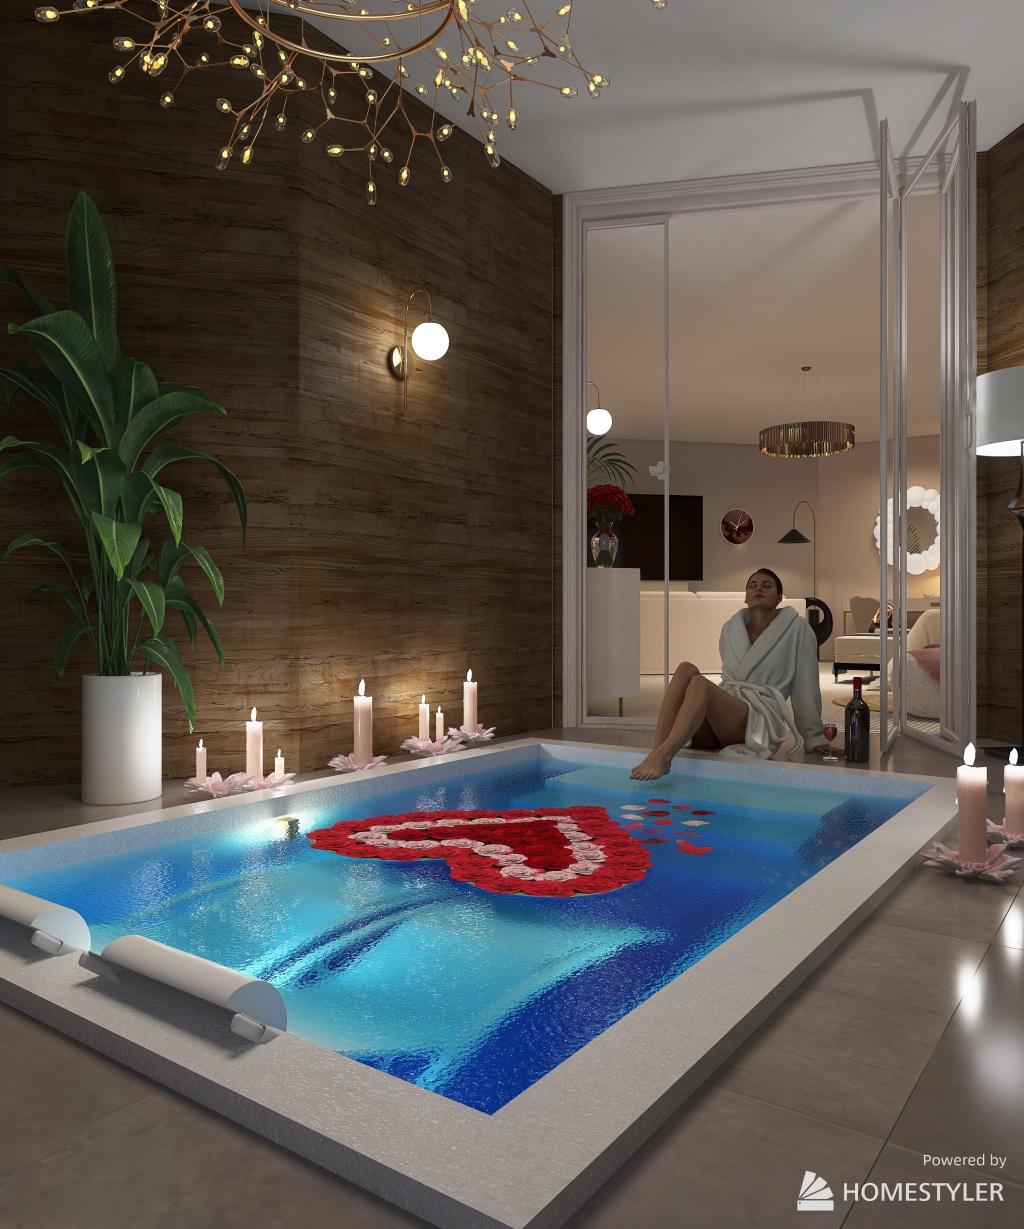 Luxury Hotel Honeymoon Suite with Jetted Bathtub and Hot tub 3d design renderings